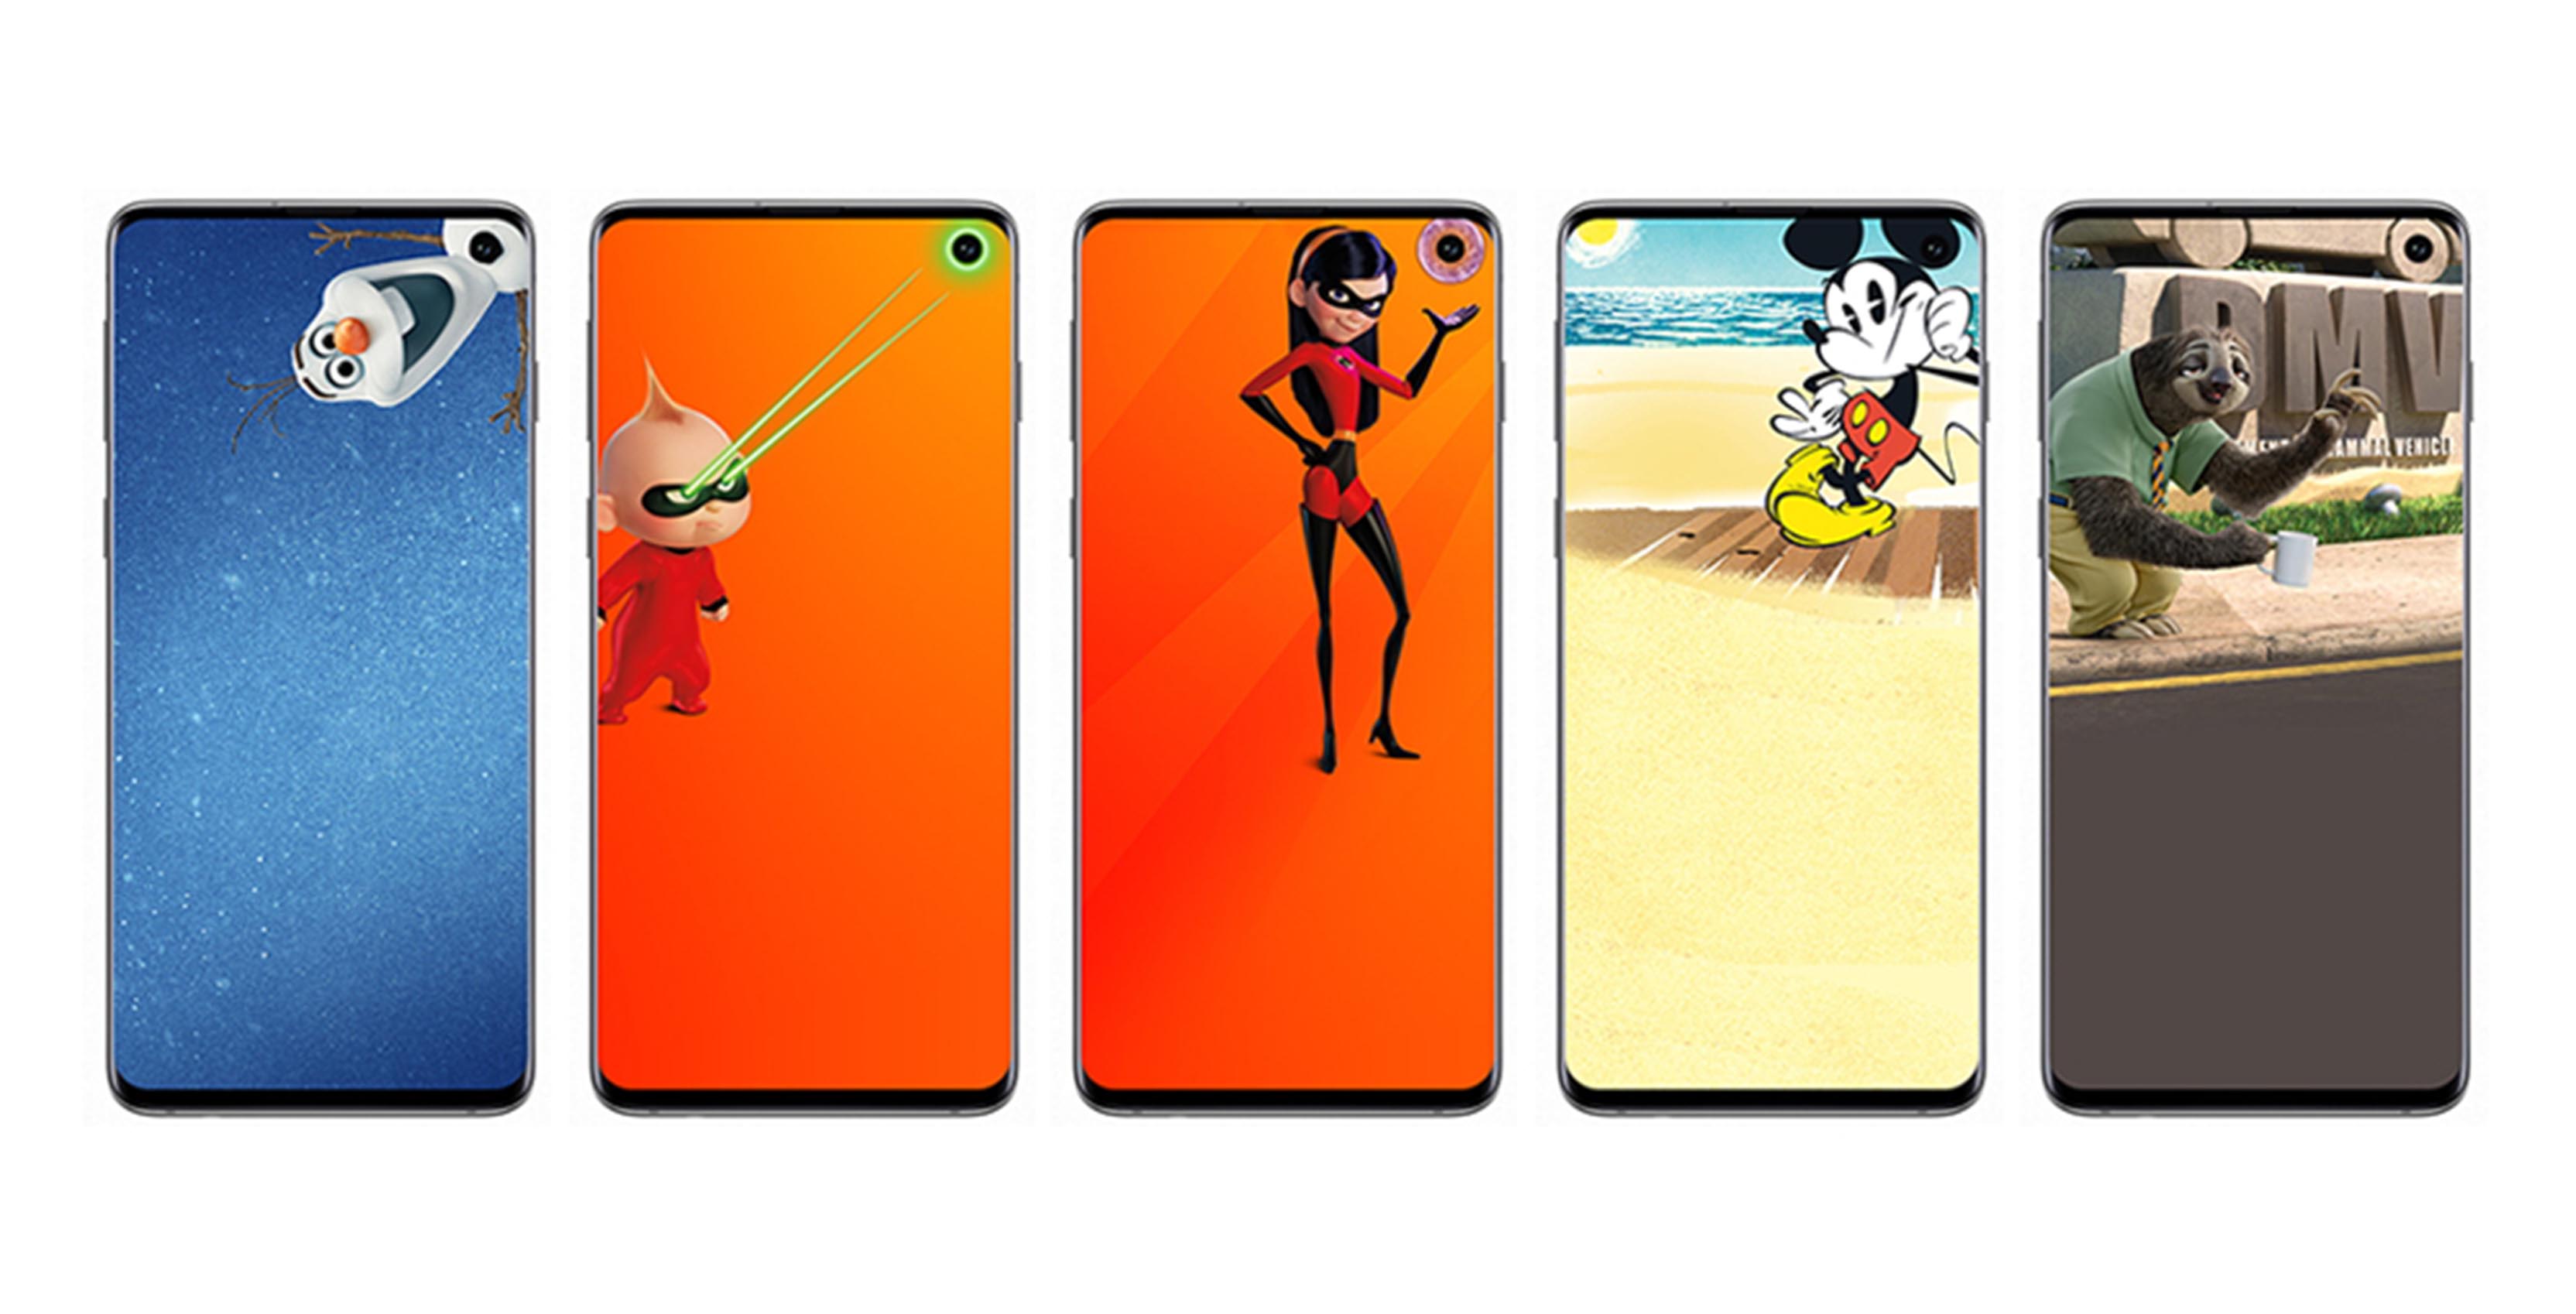 Samsung rolls out new S10, S10e wallpapers with Disney, Pixar characters